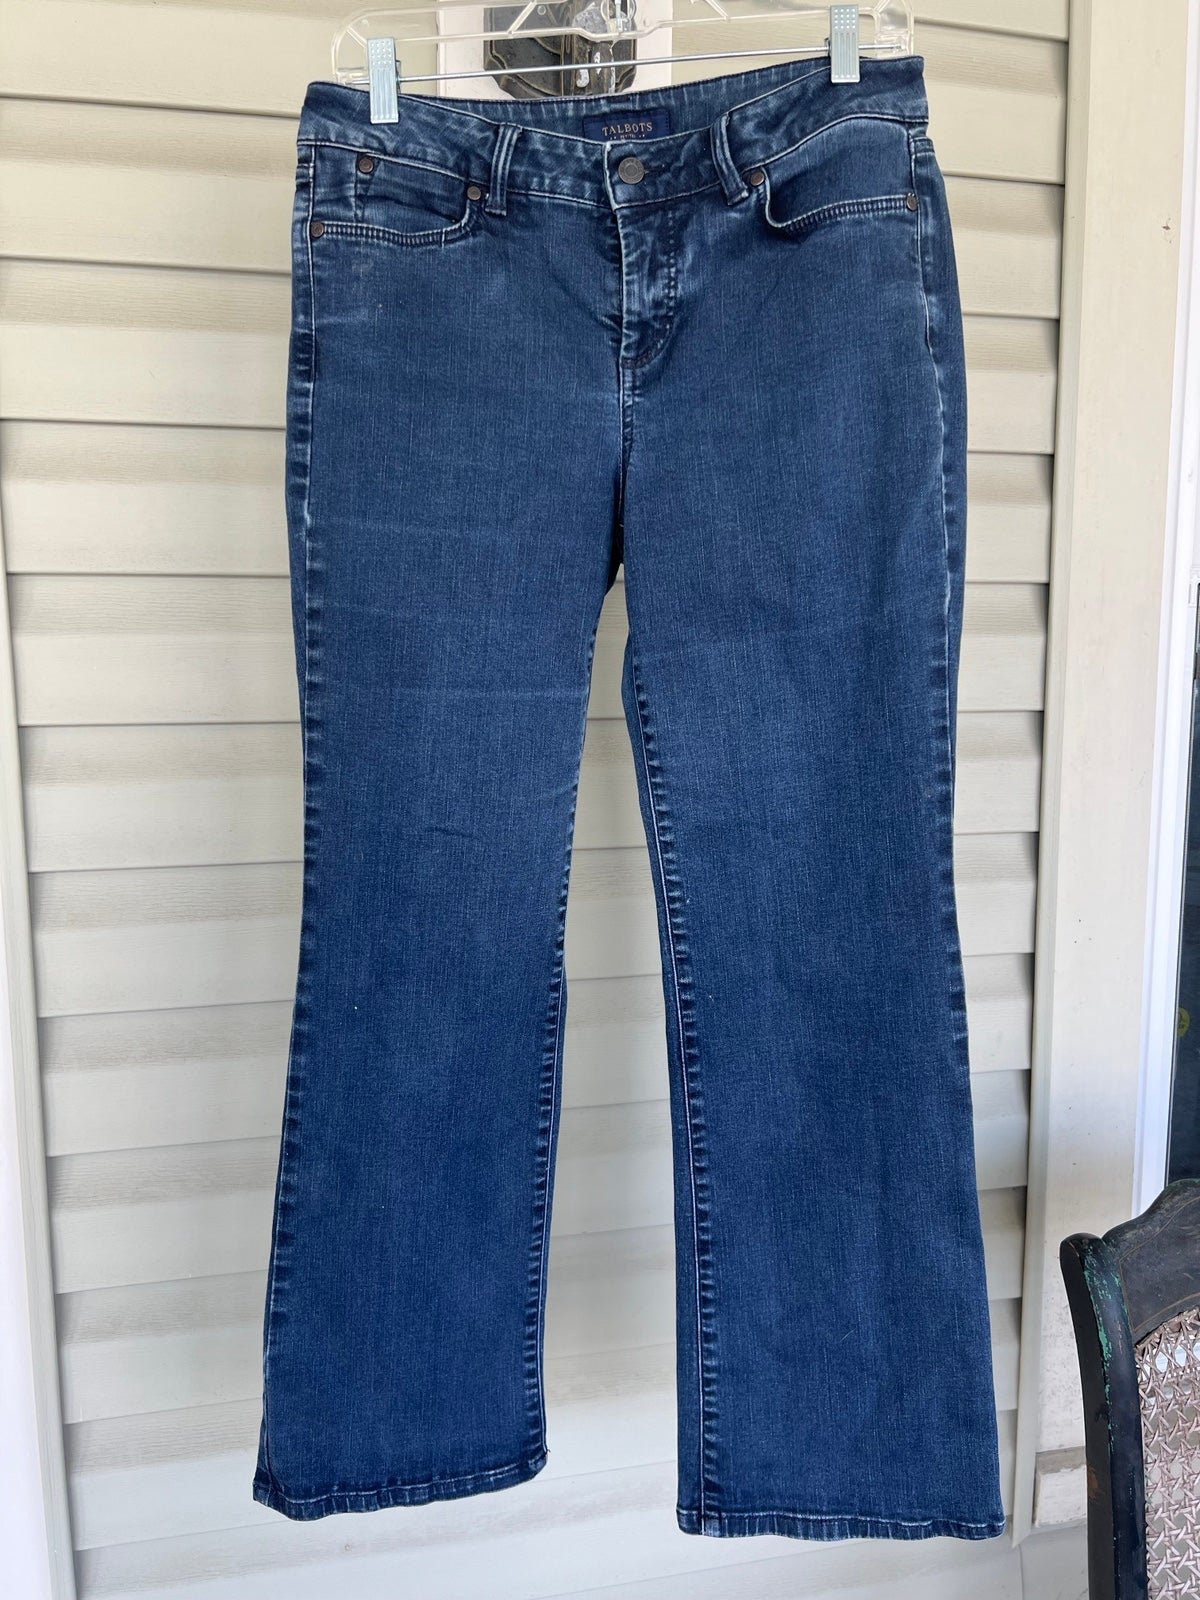 Authentic Talbots Curvy Stretch Jeans Womens 8P/30 Blue